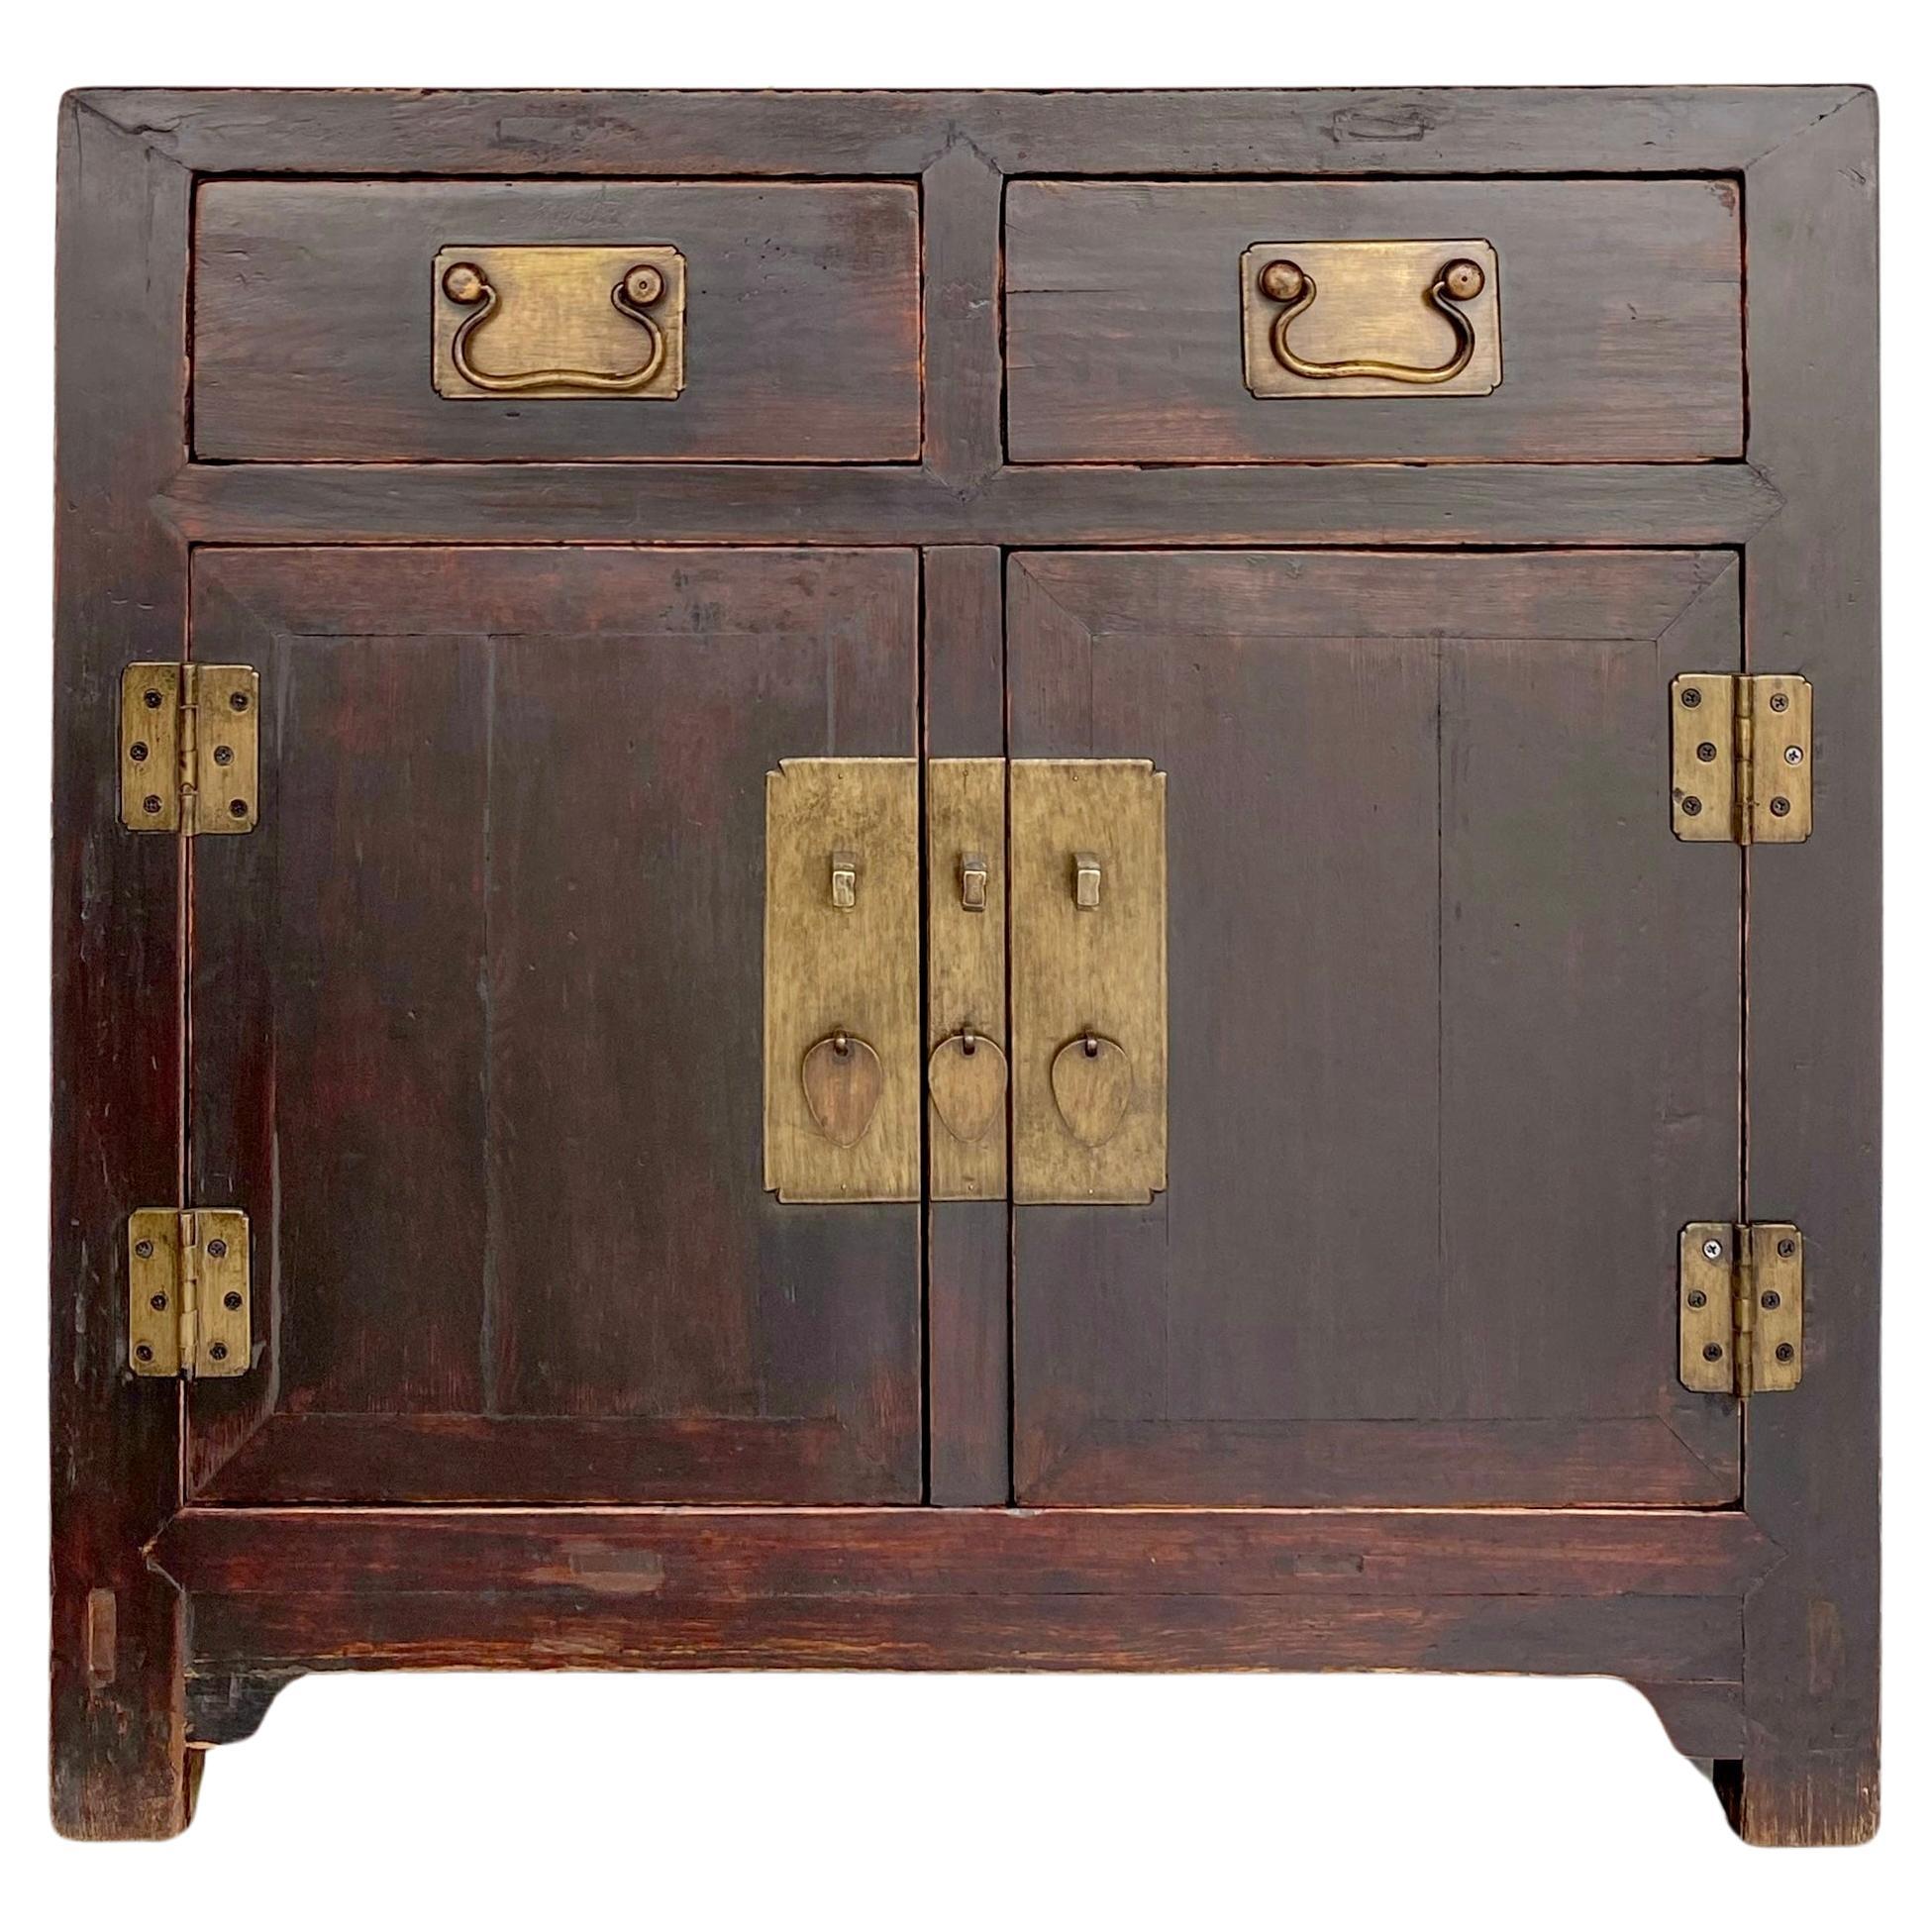 Early 20th Century Tianjin Cabinet